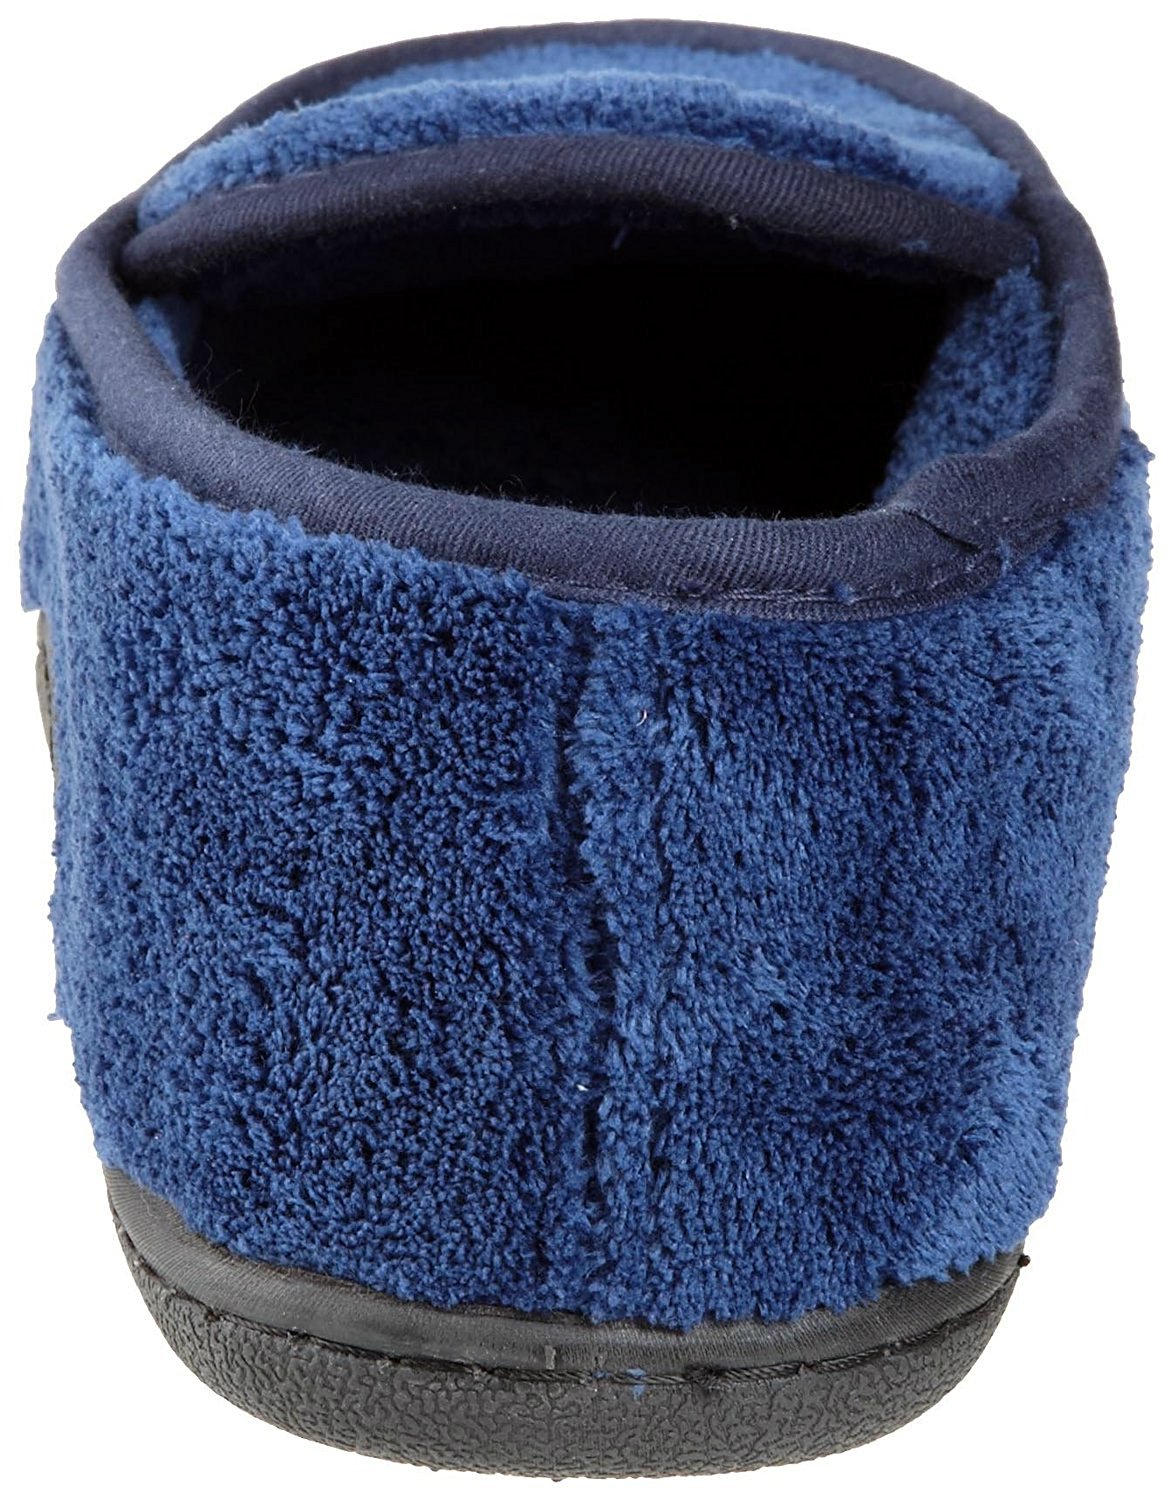 Men's Microterry Slip-On Slippers - image 1 of 3